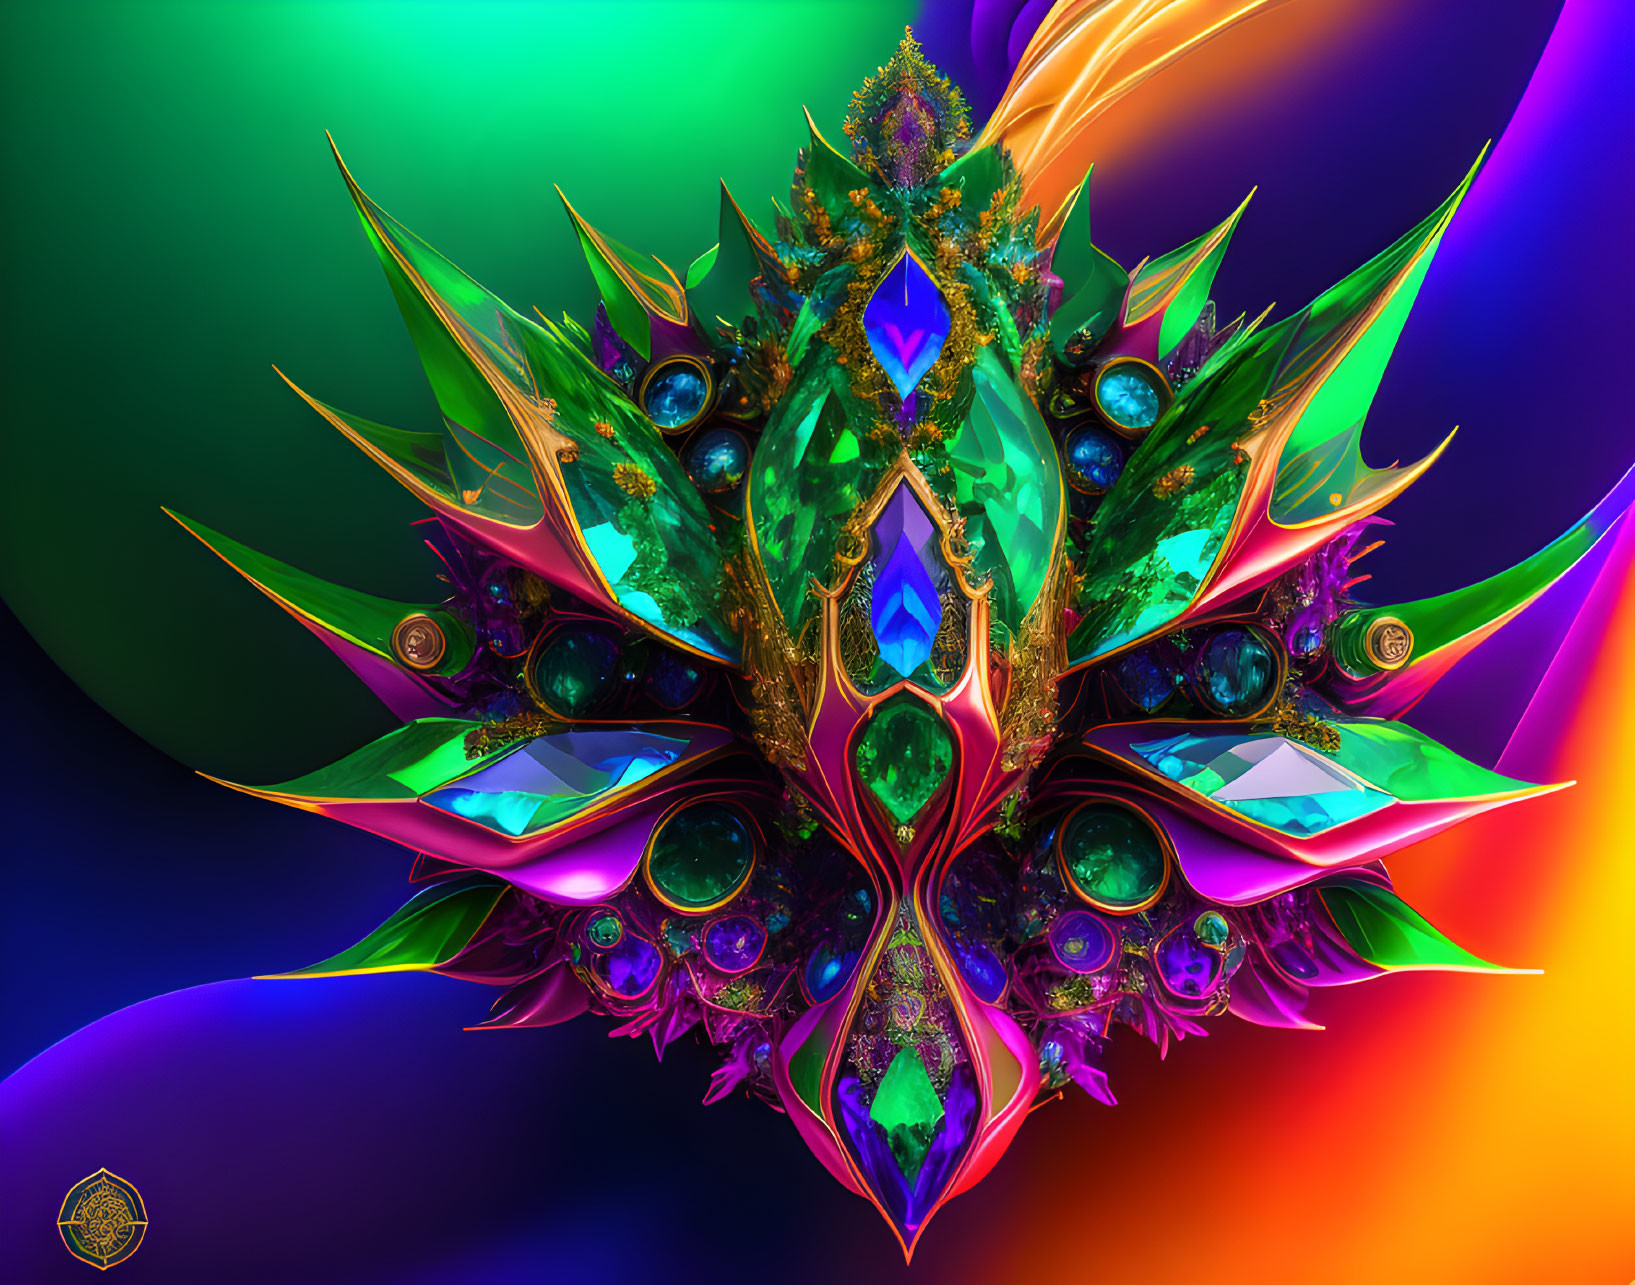 High-resolution fractal image of complex symmetrical jewel structure in green and purple hues on multicolored